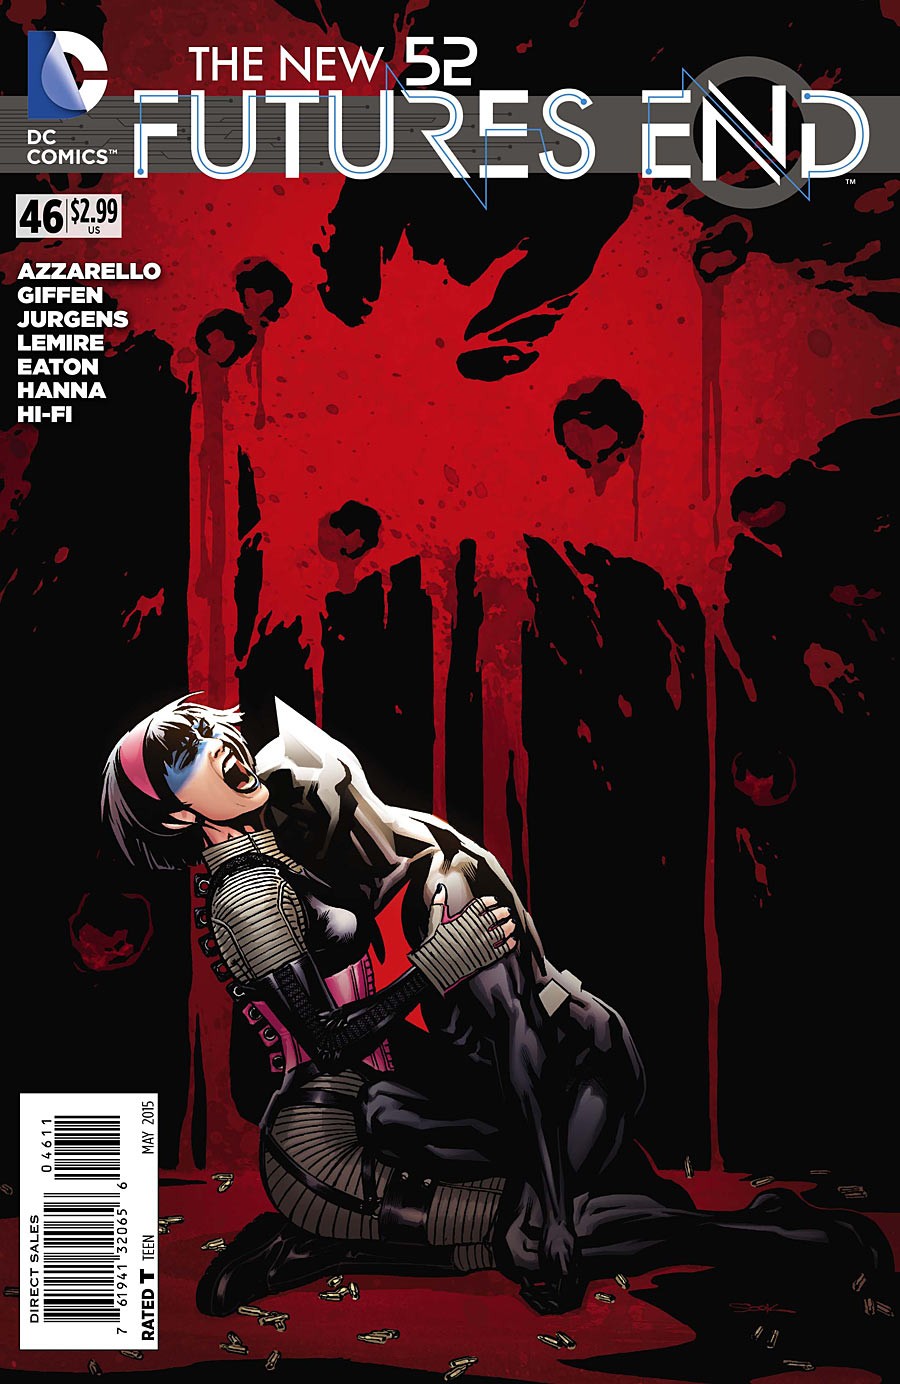 The New 52: Futures End Vol. 1 #46